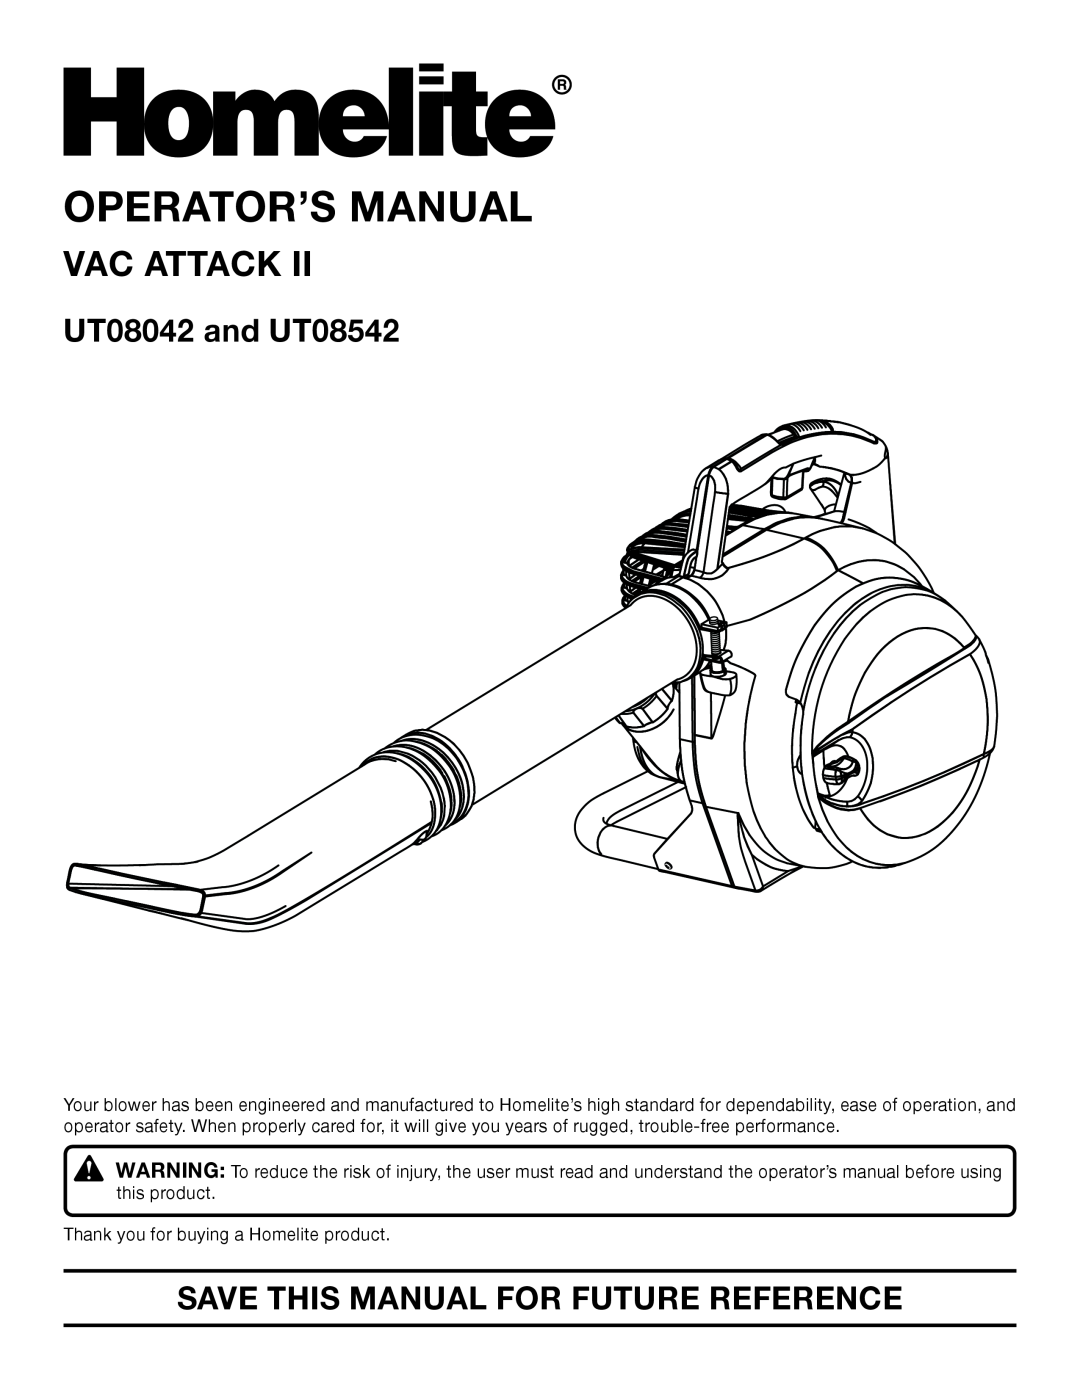 Homelite manual Operator’S Manual, Vac Attack, UT08042 and UT08542, Save This Manual For Future Reference 